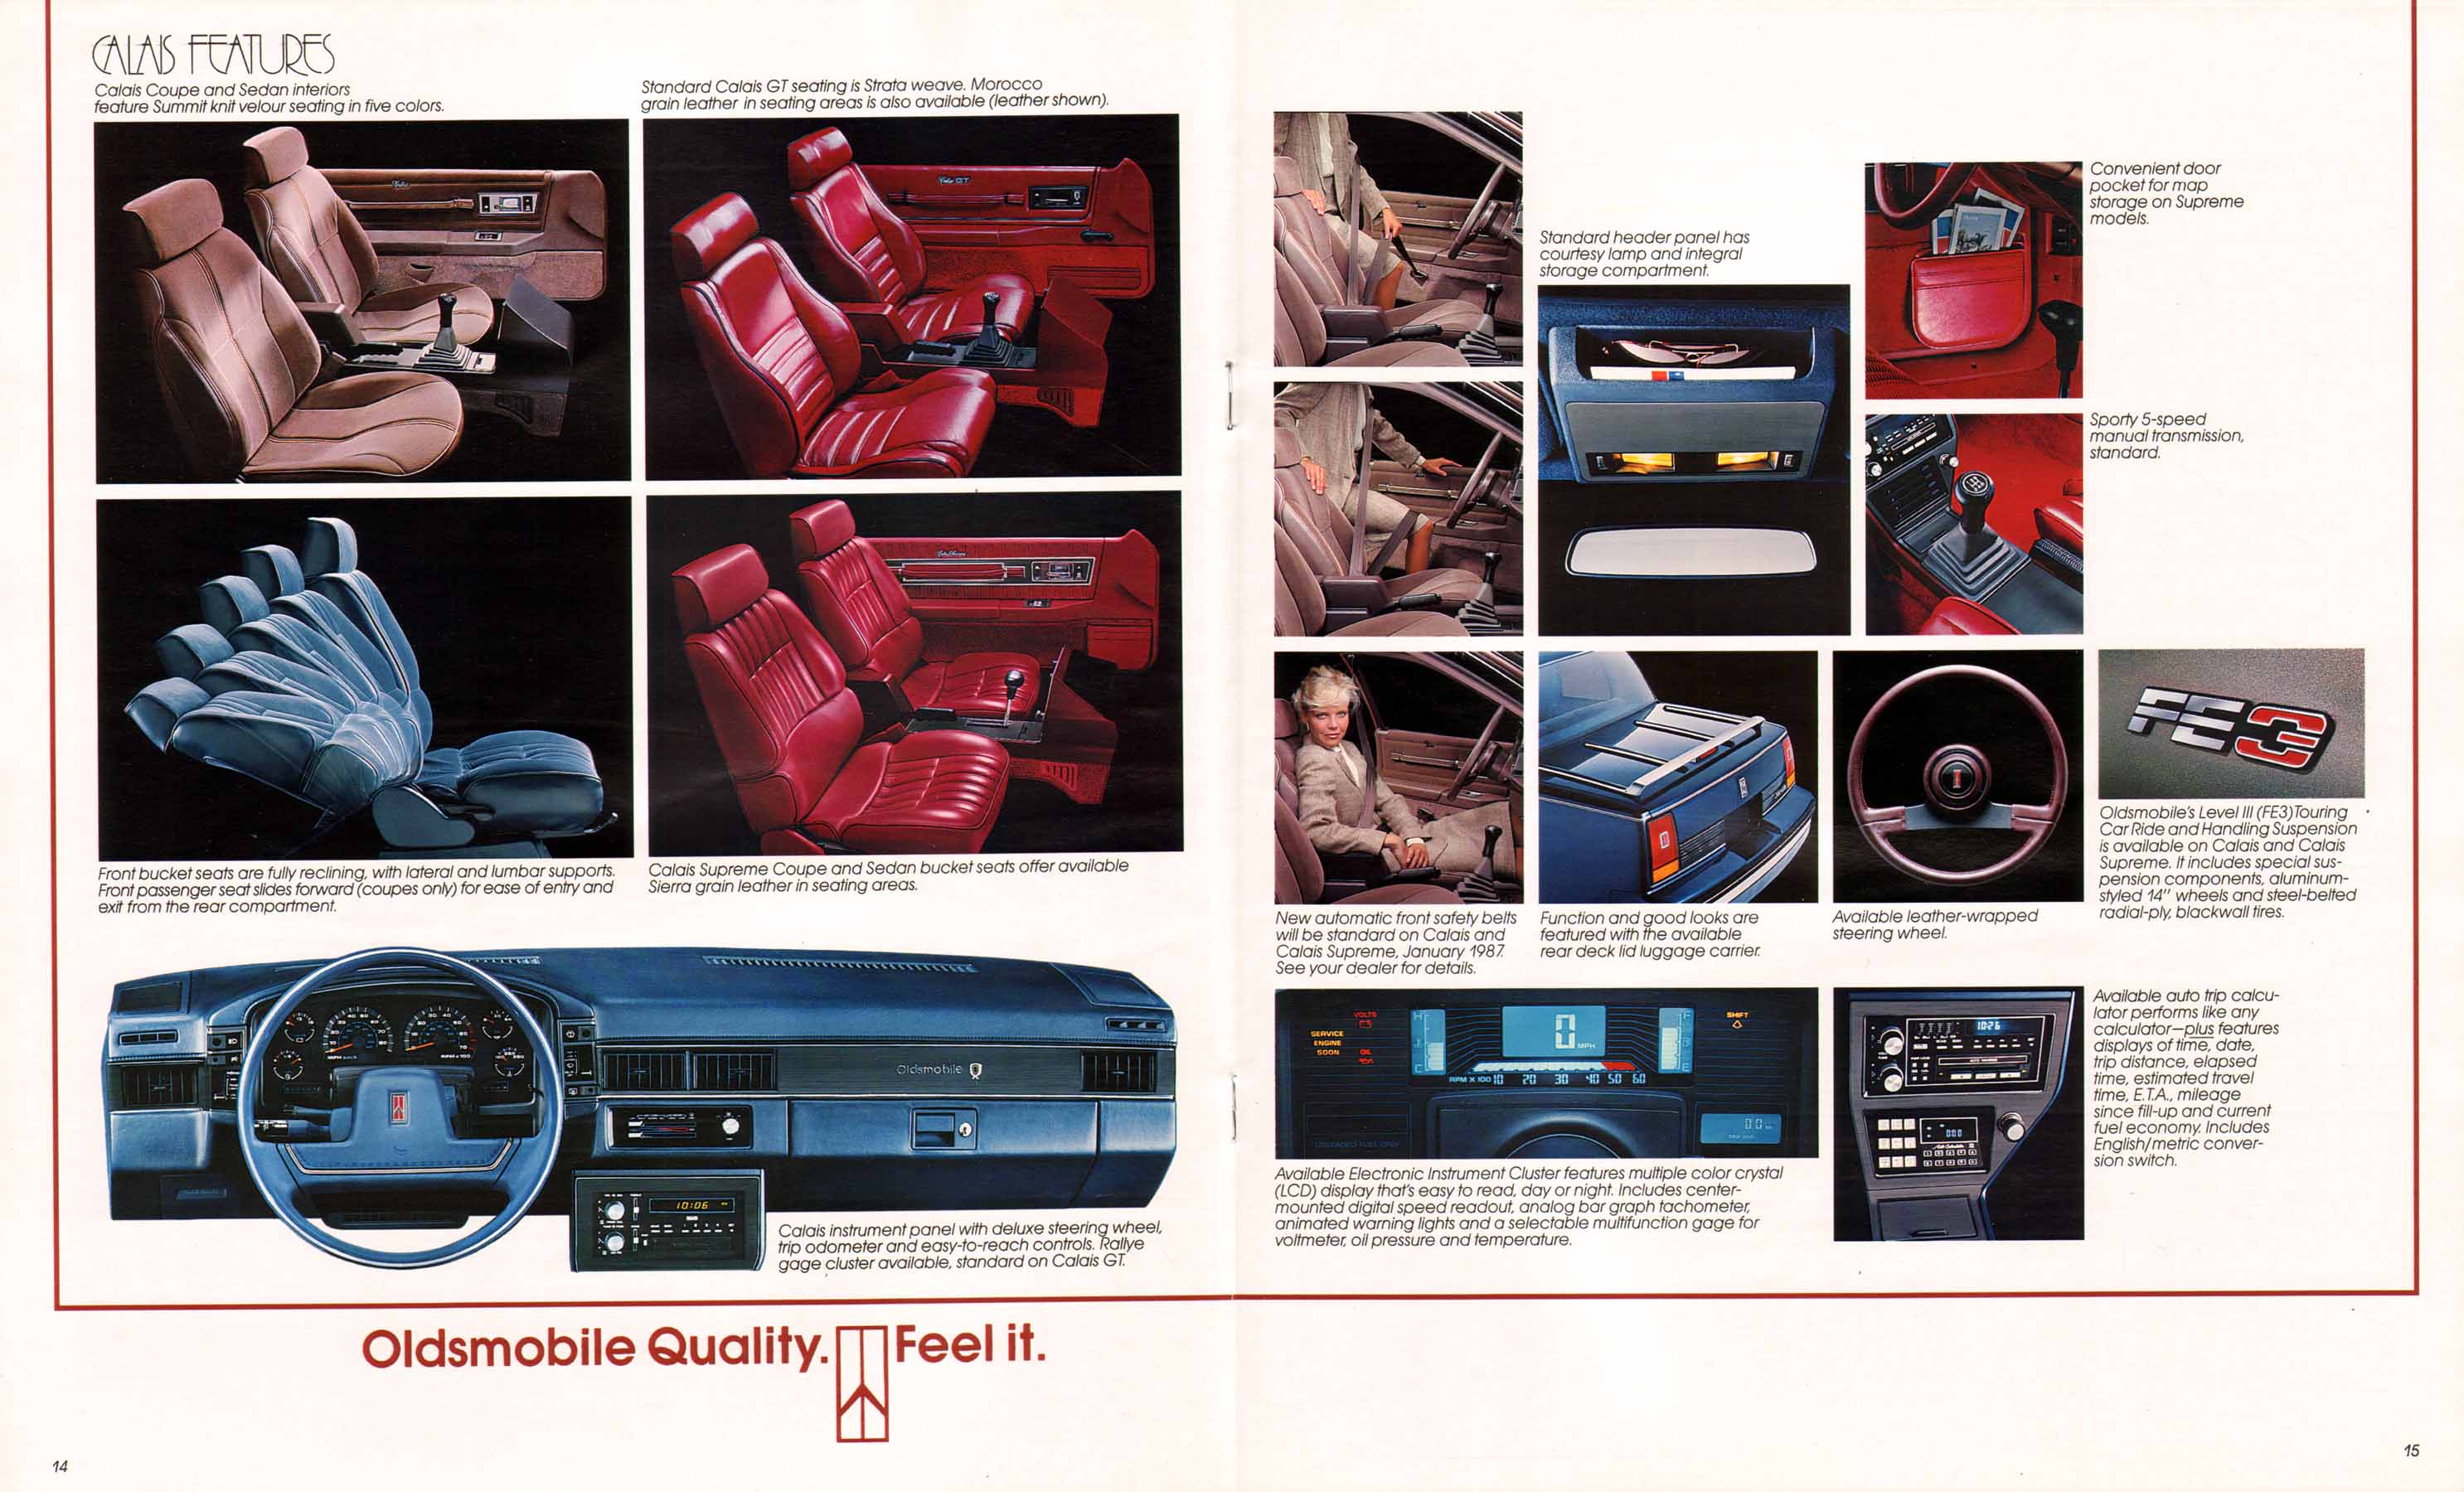 1987 Oldsmobile Small Size-14-15